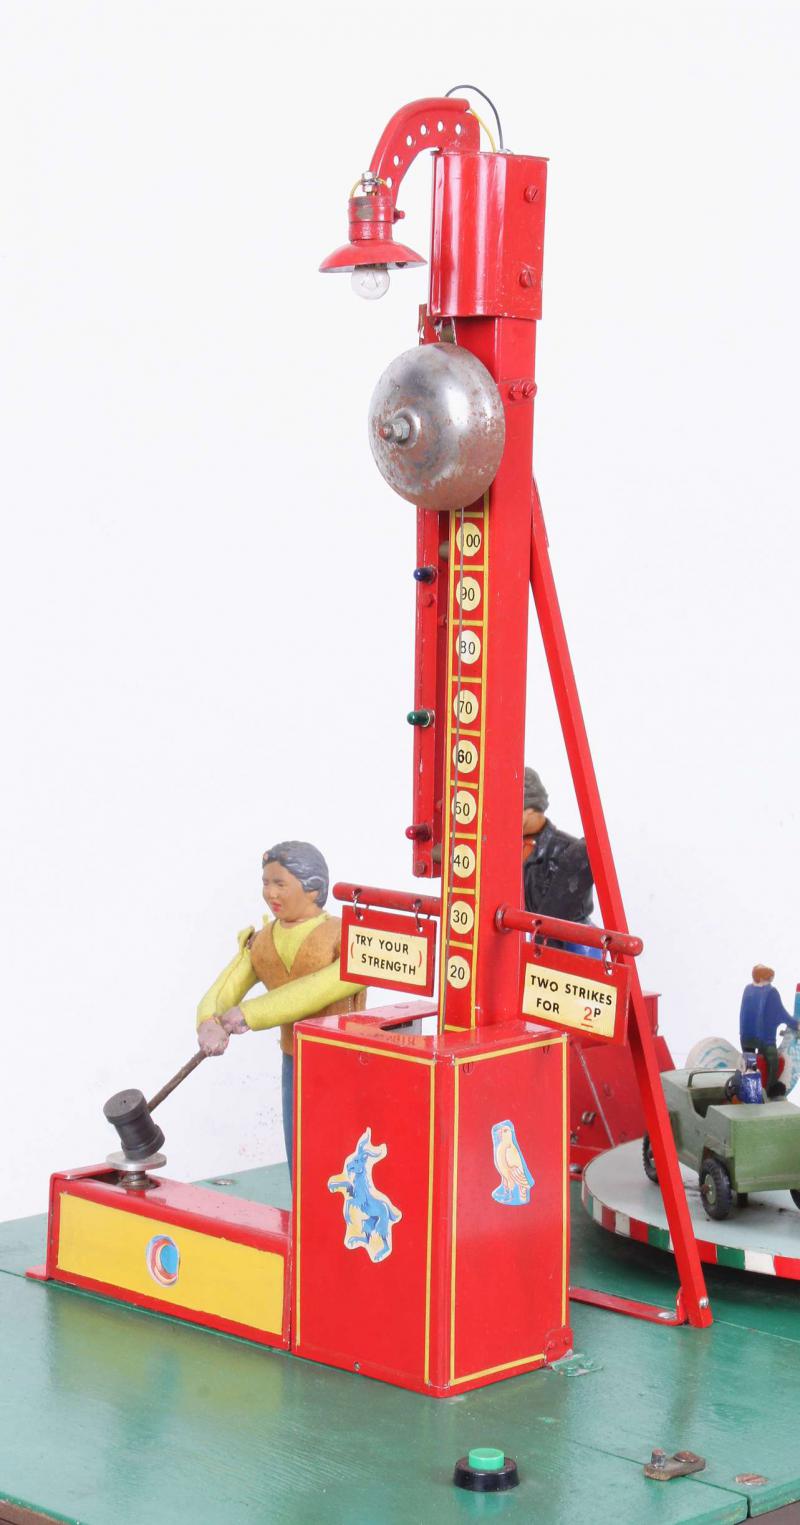 Fairground "Test your Strength" stall & juvenile roundabout